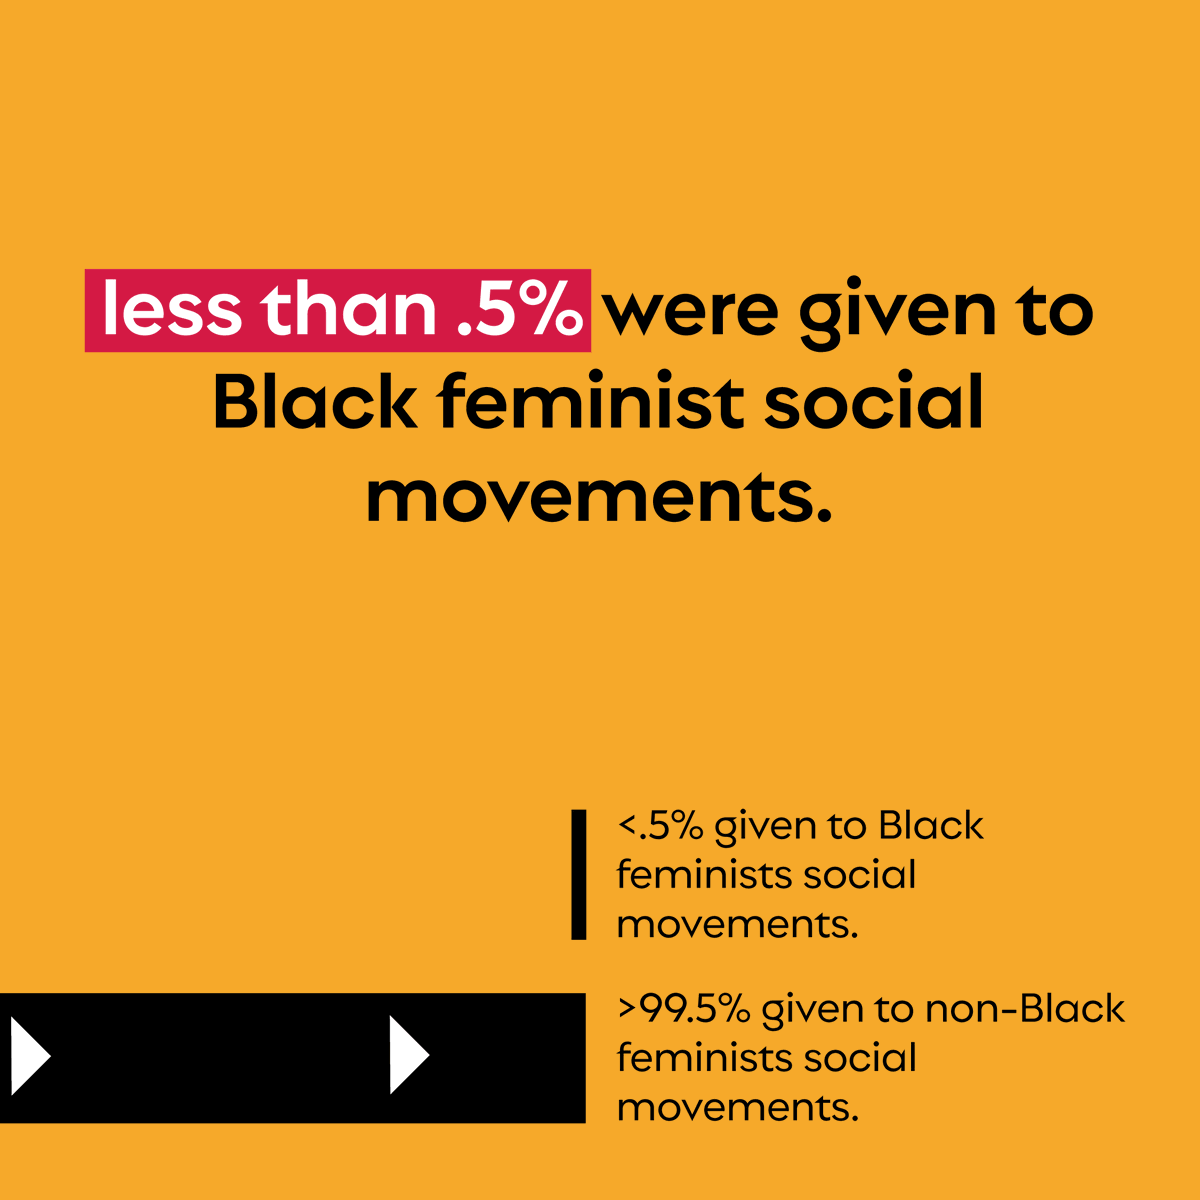 An open letter released today from @blackfemfund & a range of leaders across philanthropy urges the sector to support Black feminists globally. blackfeministfund.org/#openletter #FundBlackFeminists #BlackFeministMovements